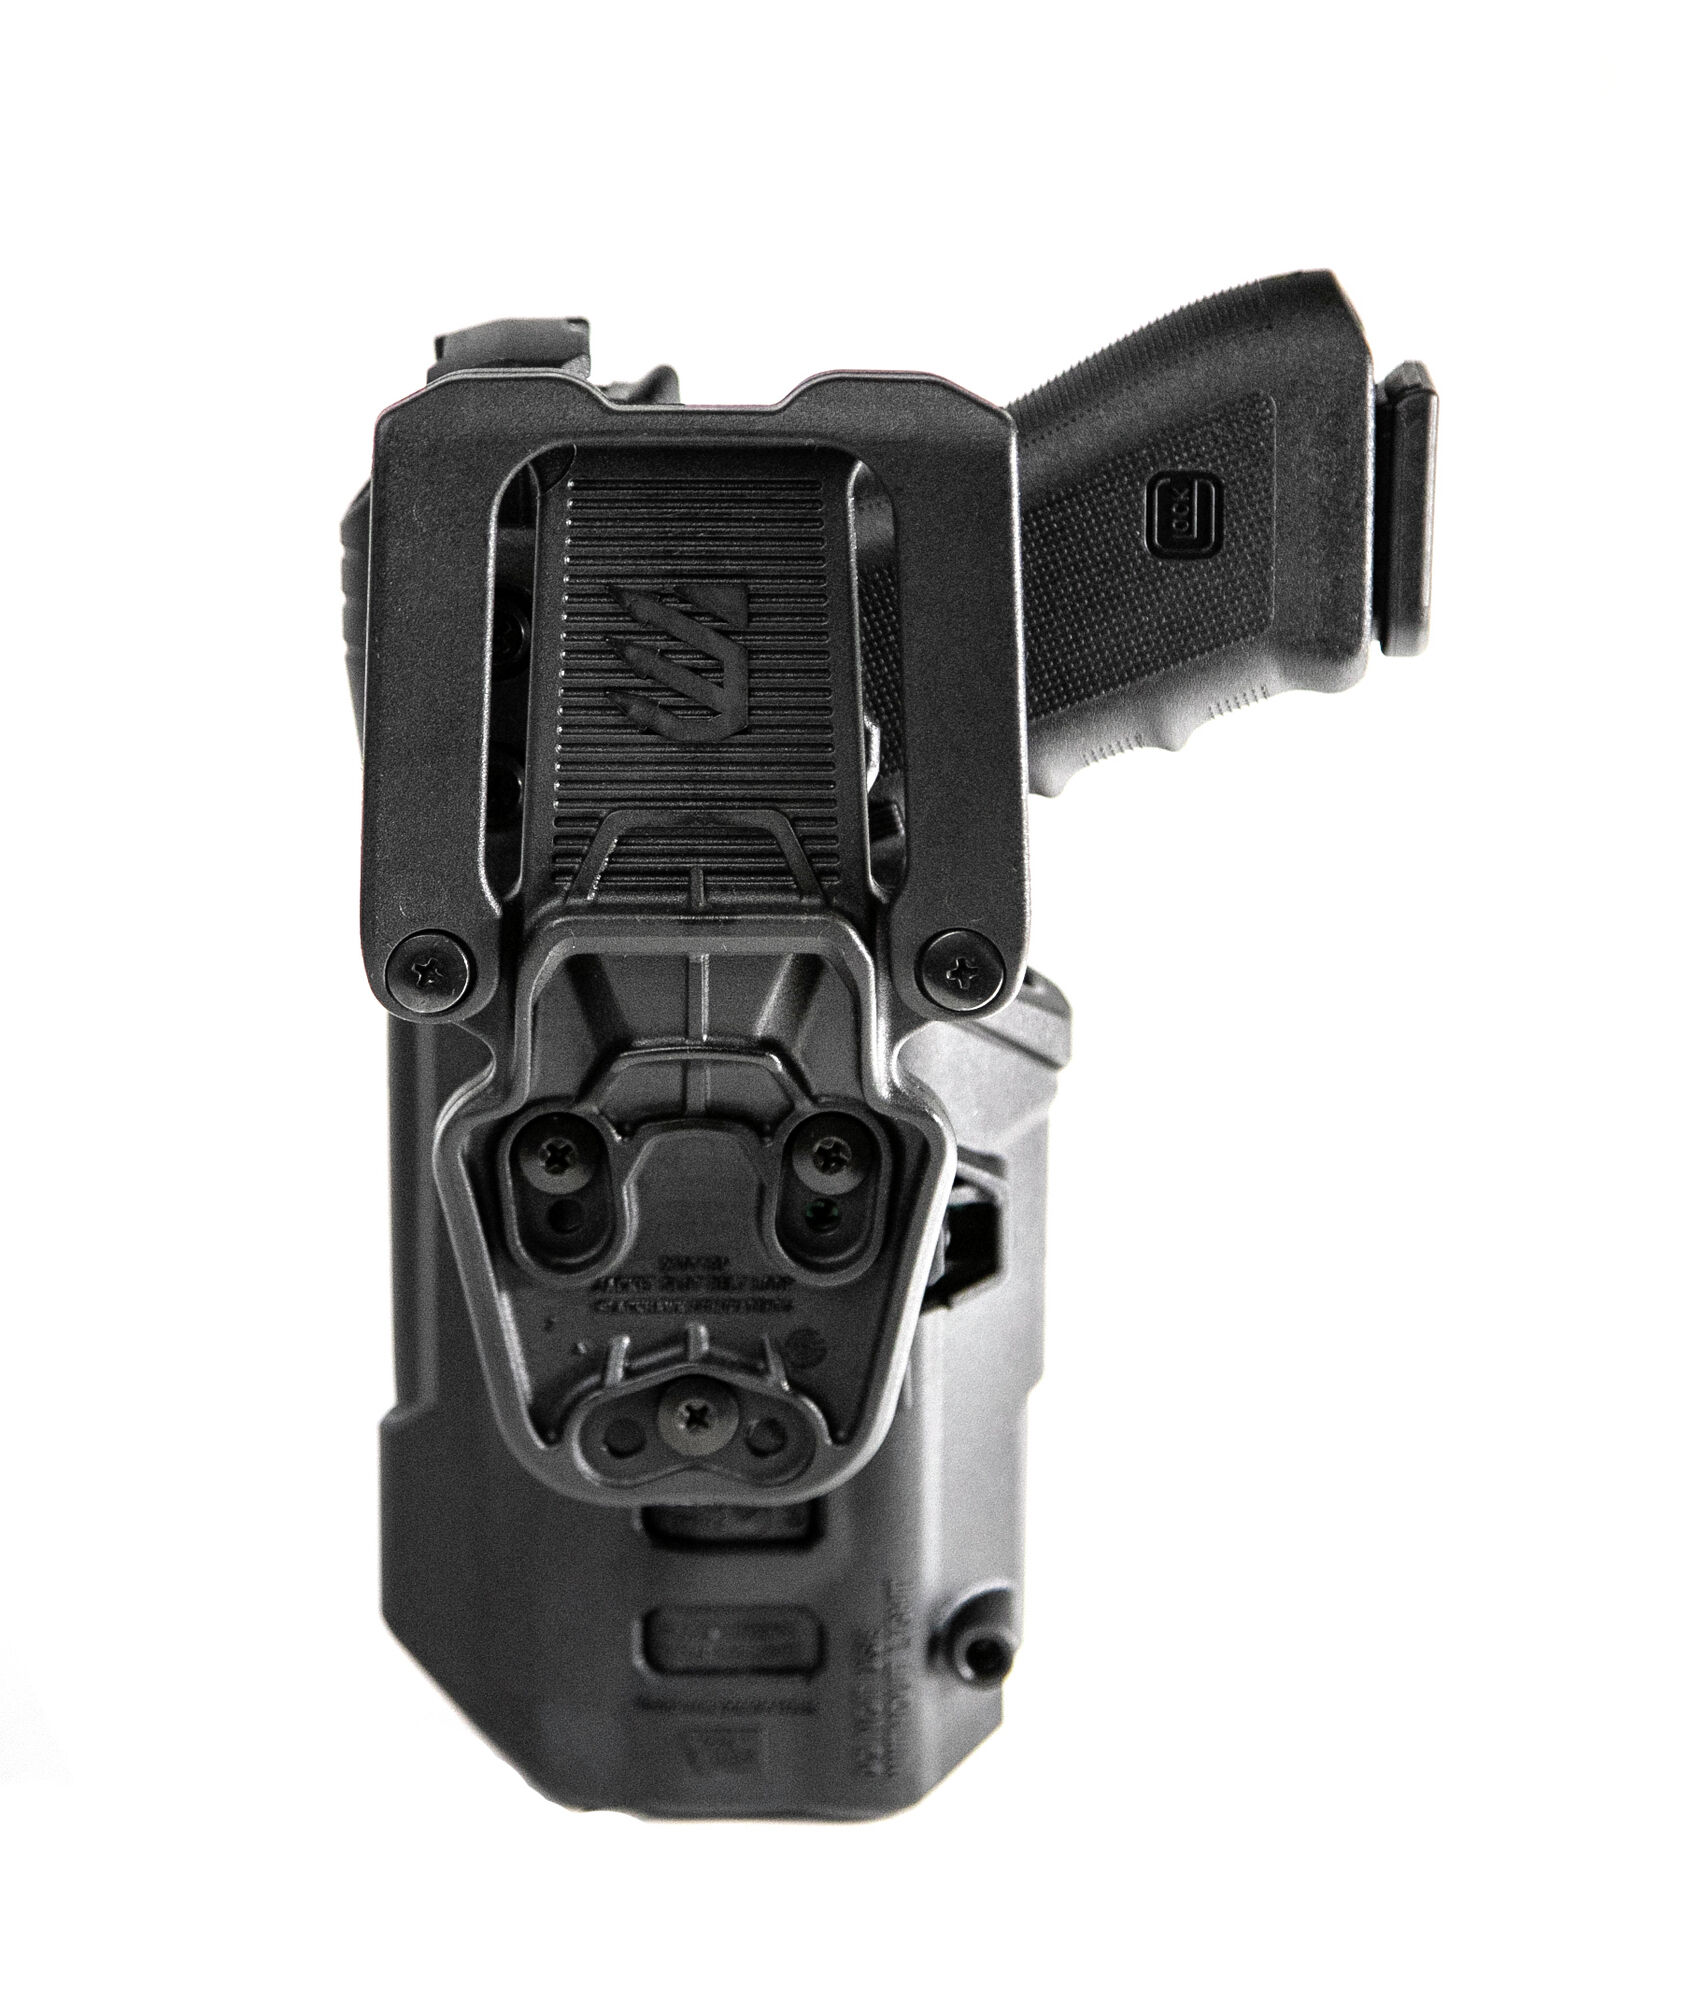 Details about   BLACKHAWK T-Series Duty Holster Right Hand Black Fits Glock 17/19/22/31 Polymer 